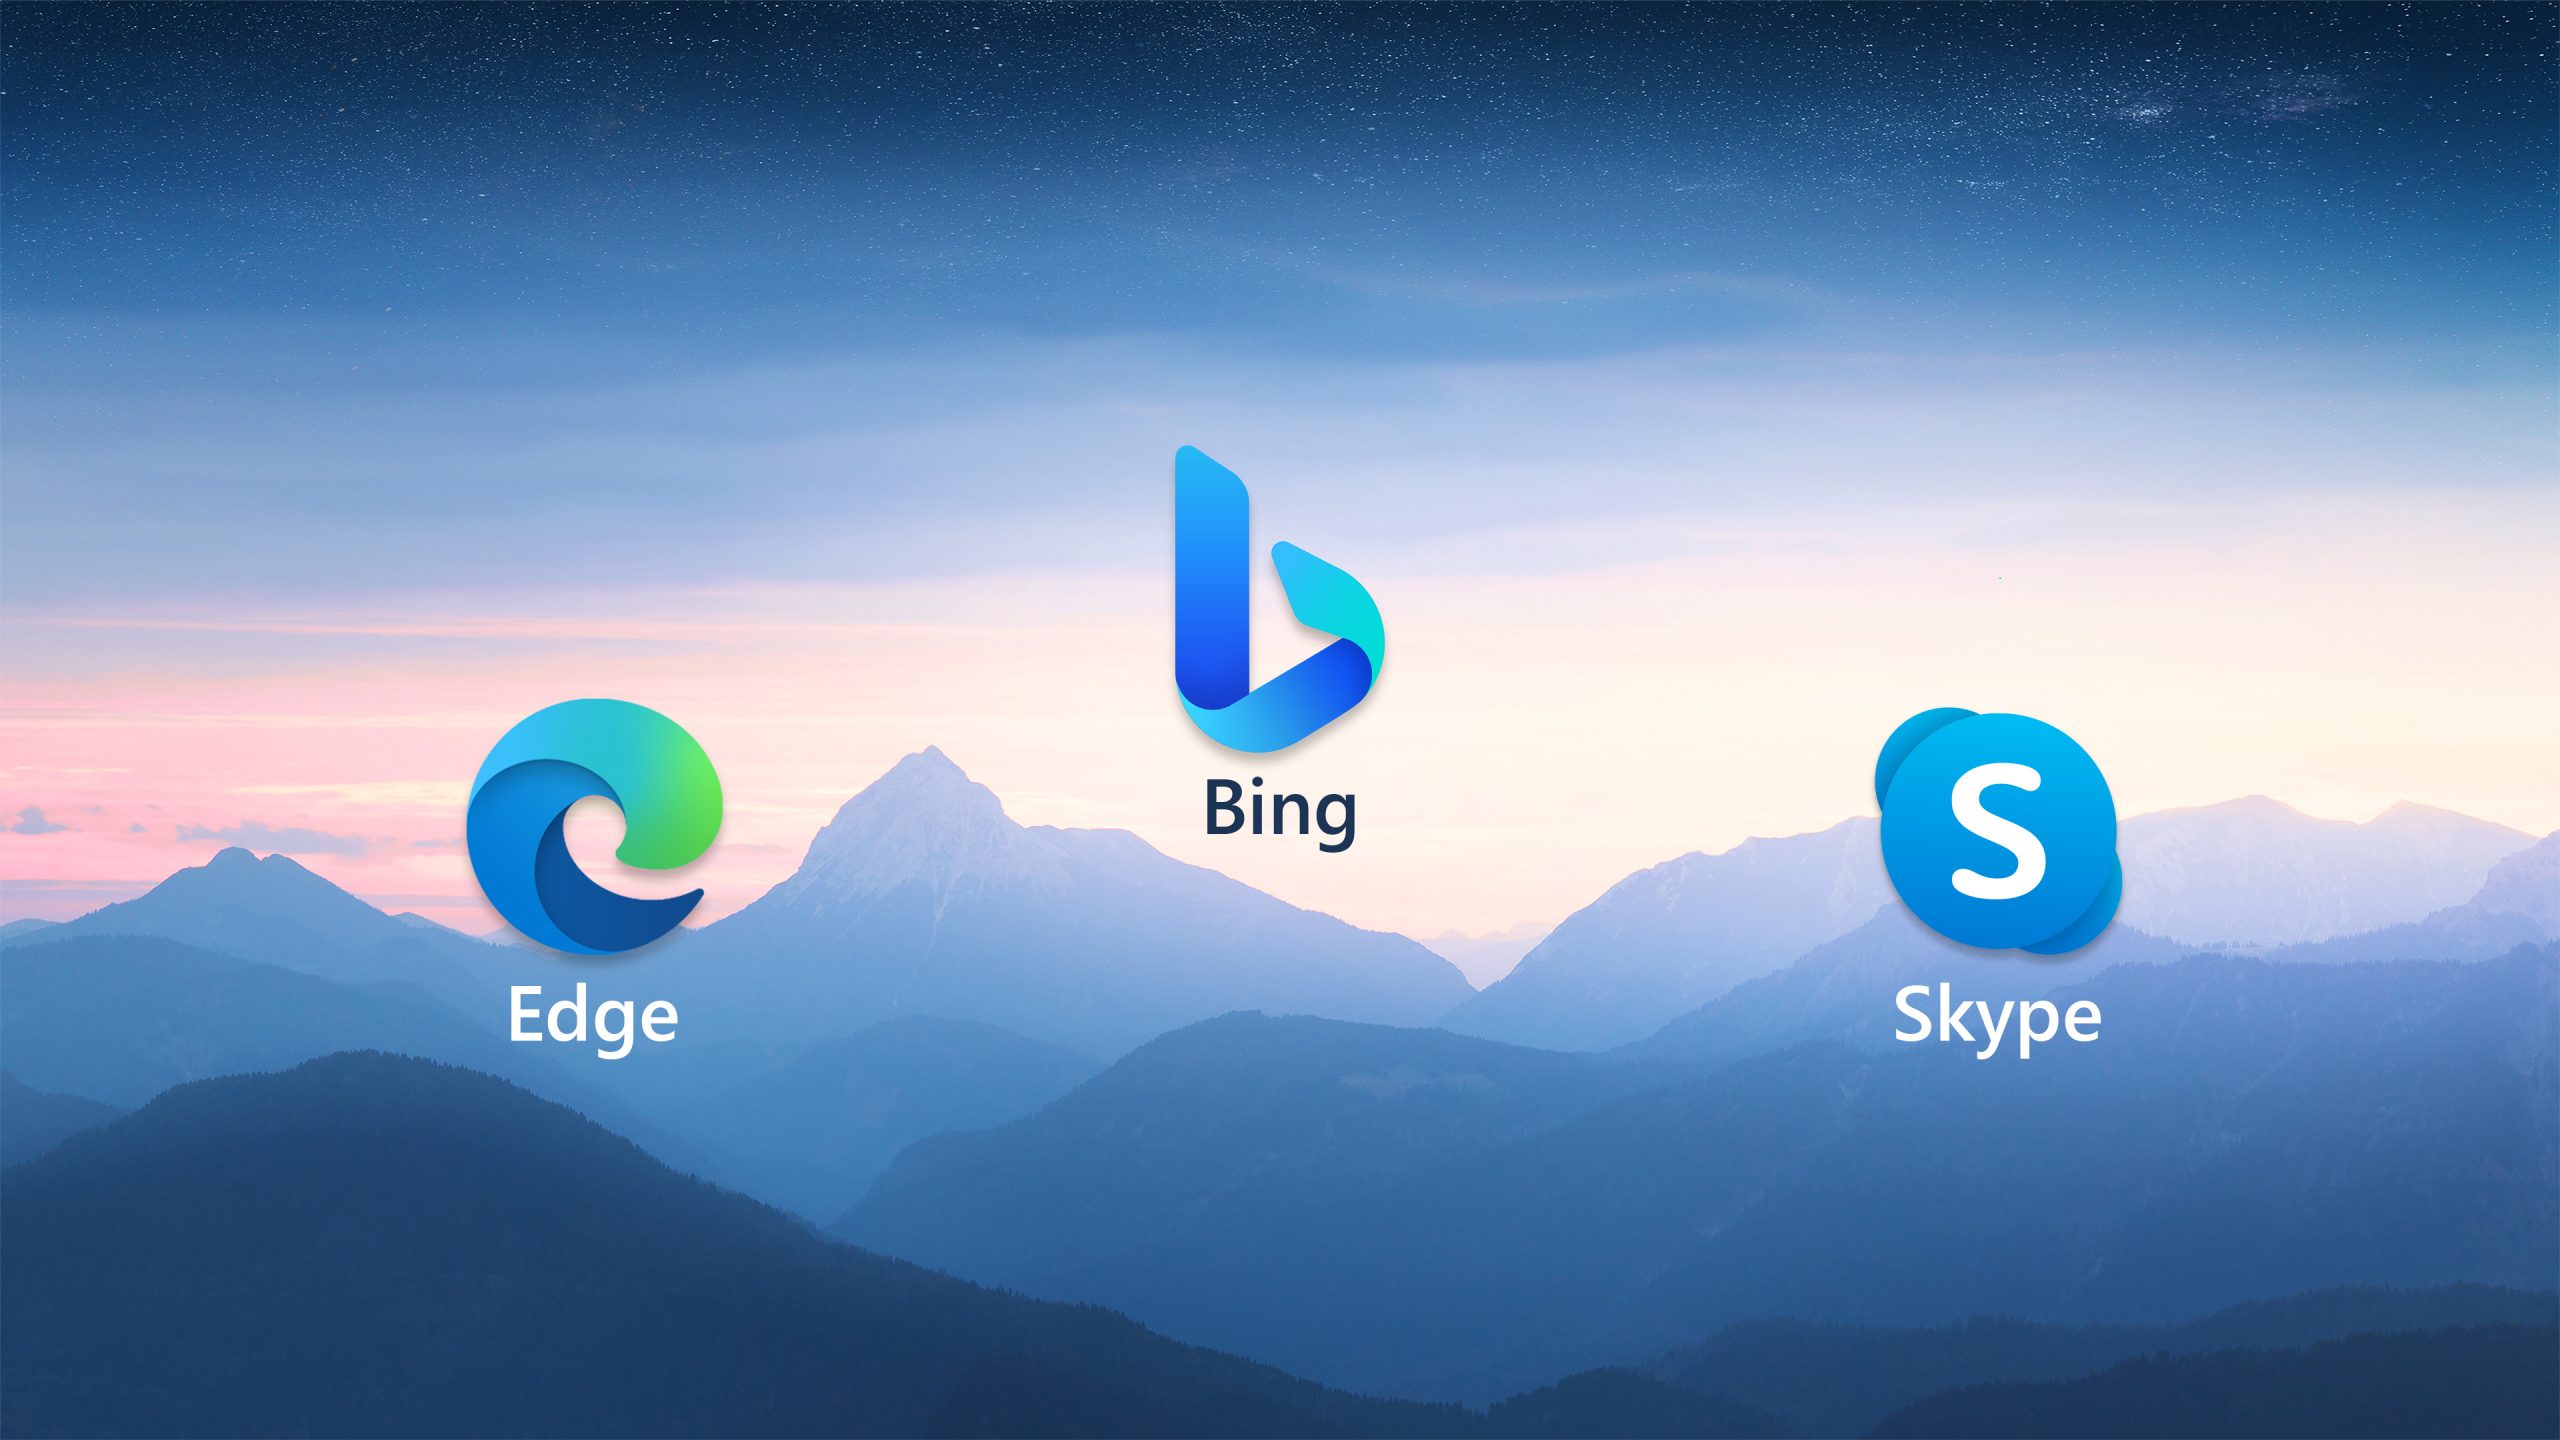 Microsoft's new Bing Wallpaper application is now available